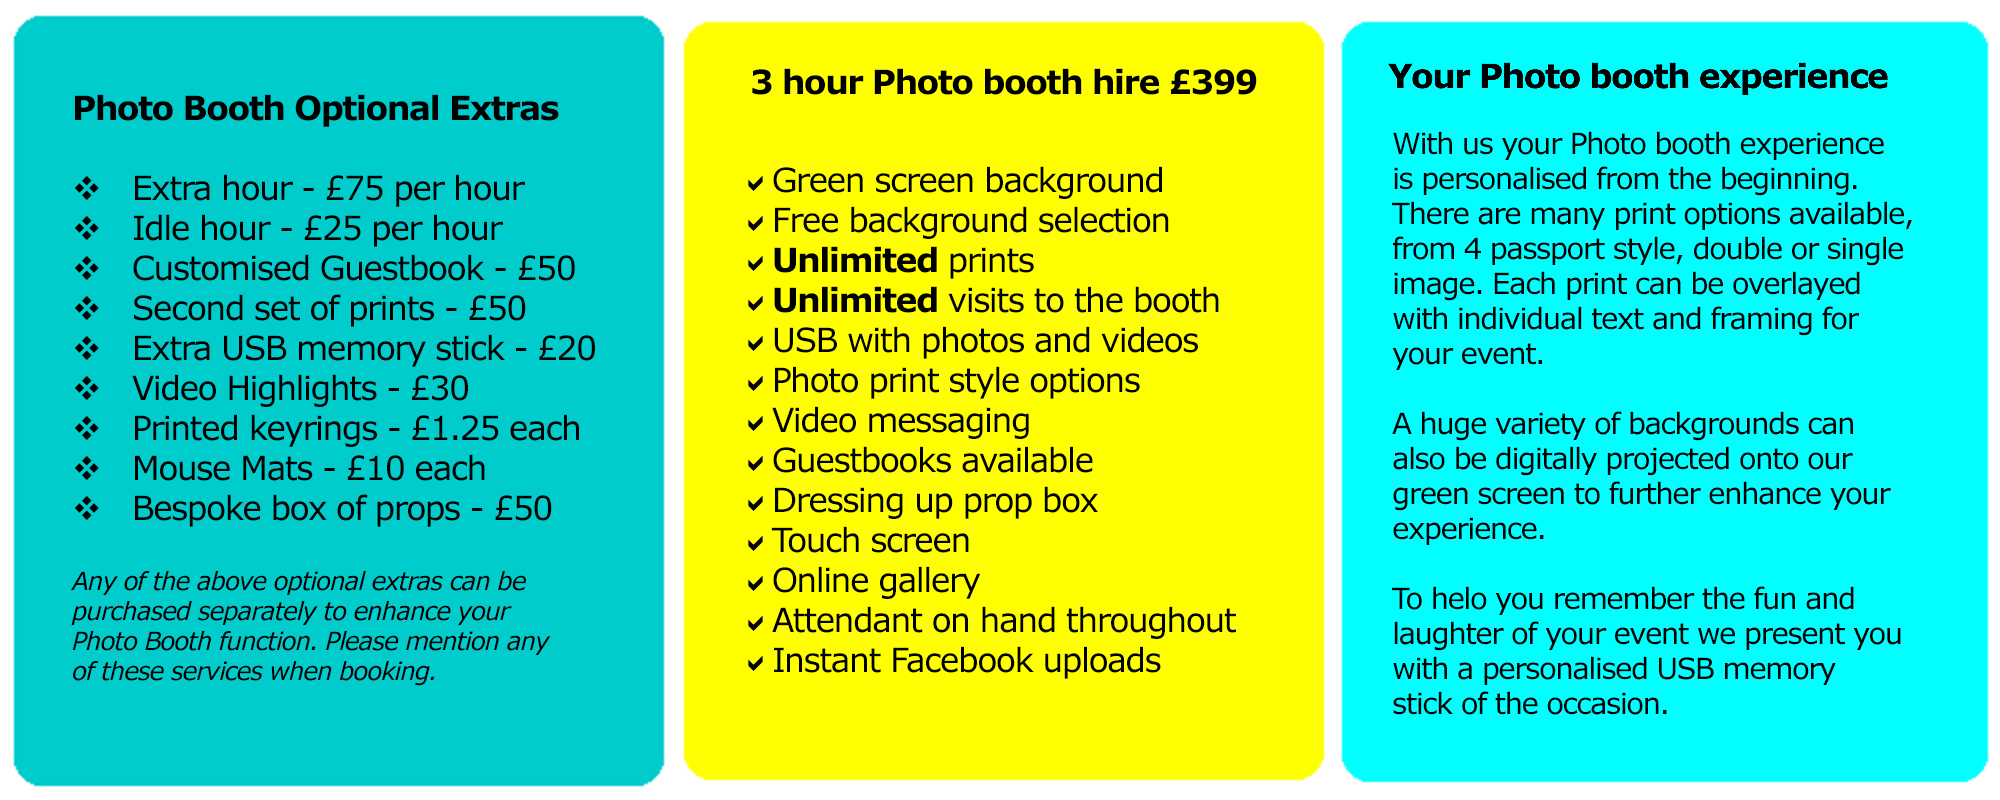 I Want a Photo Booth: Photo booth hire for weddings and events in Oxfordshire.